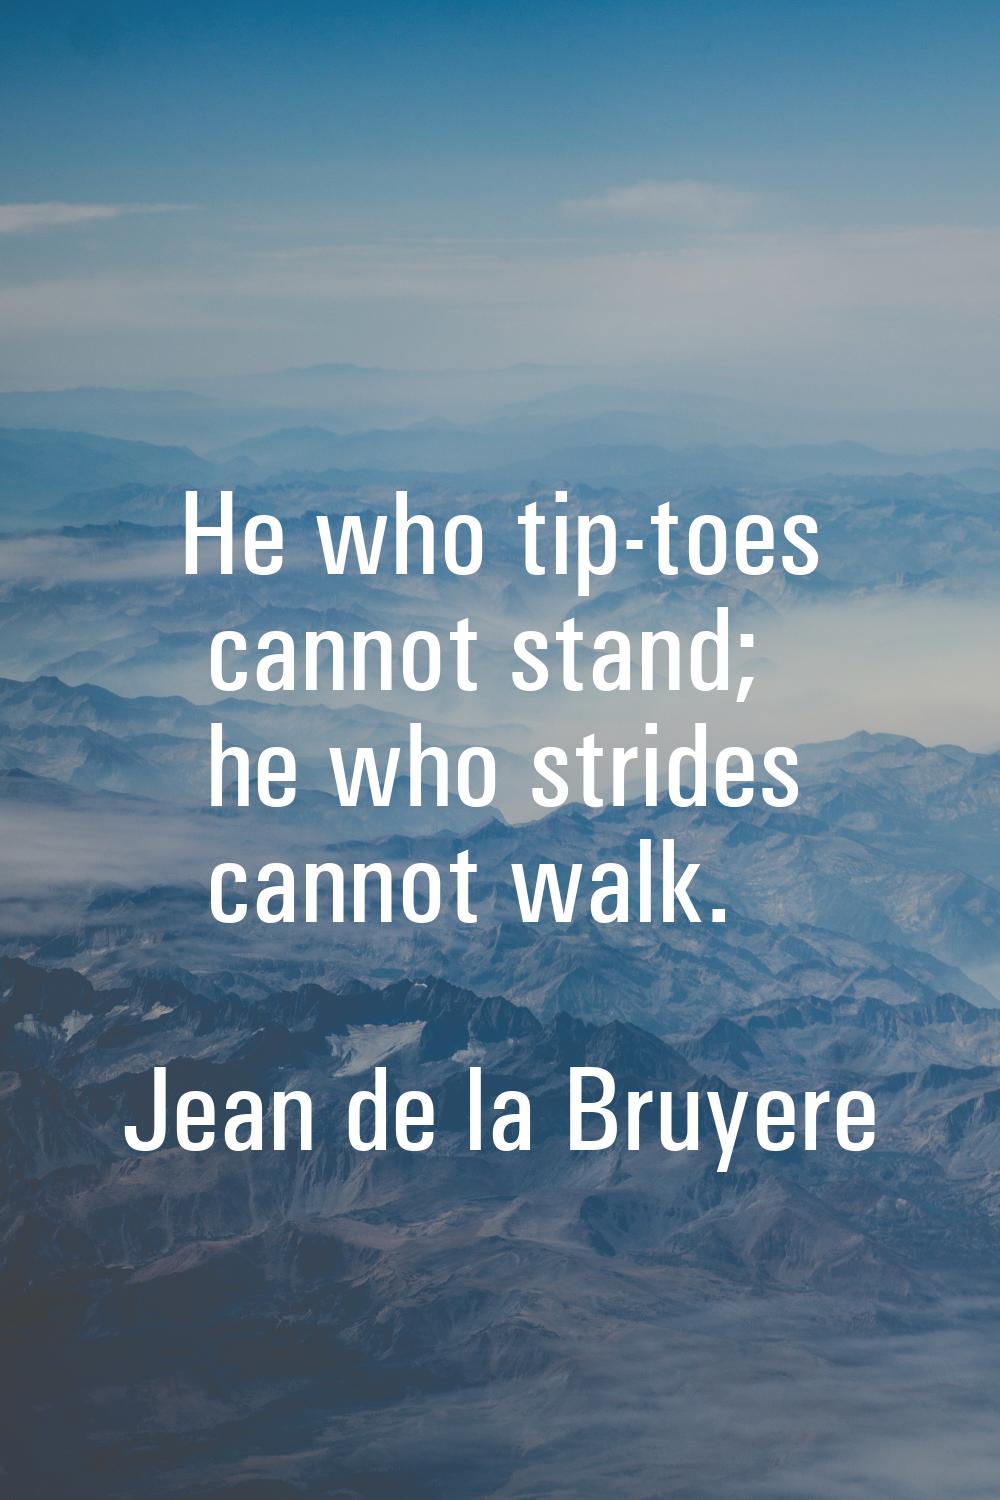 He who tip-toes cannot stand; he who strides cannot walk.